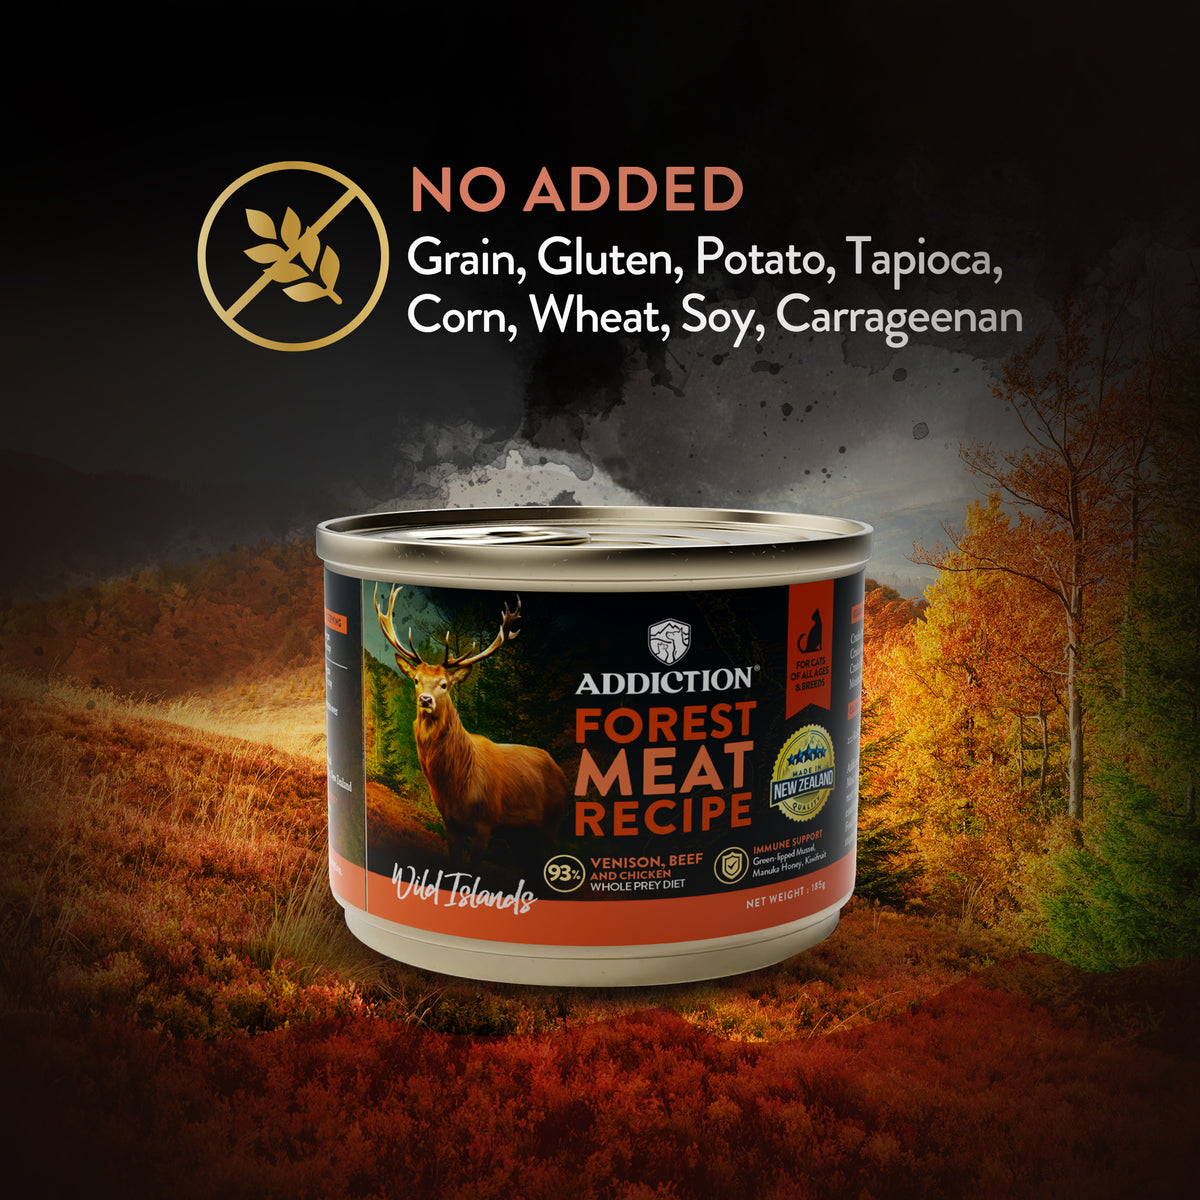 Addiction Wild Islands Cat Forest Meat Can 185g